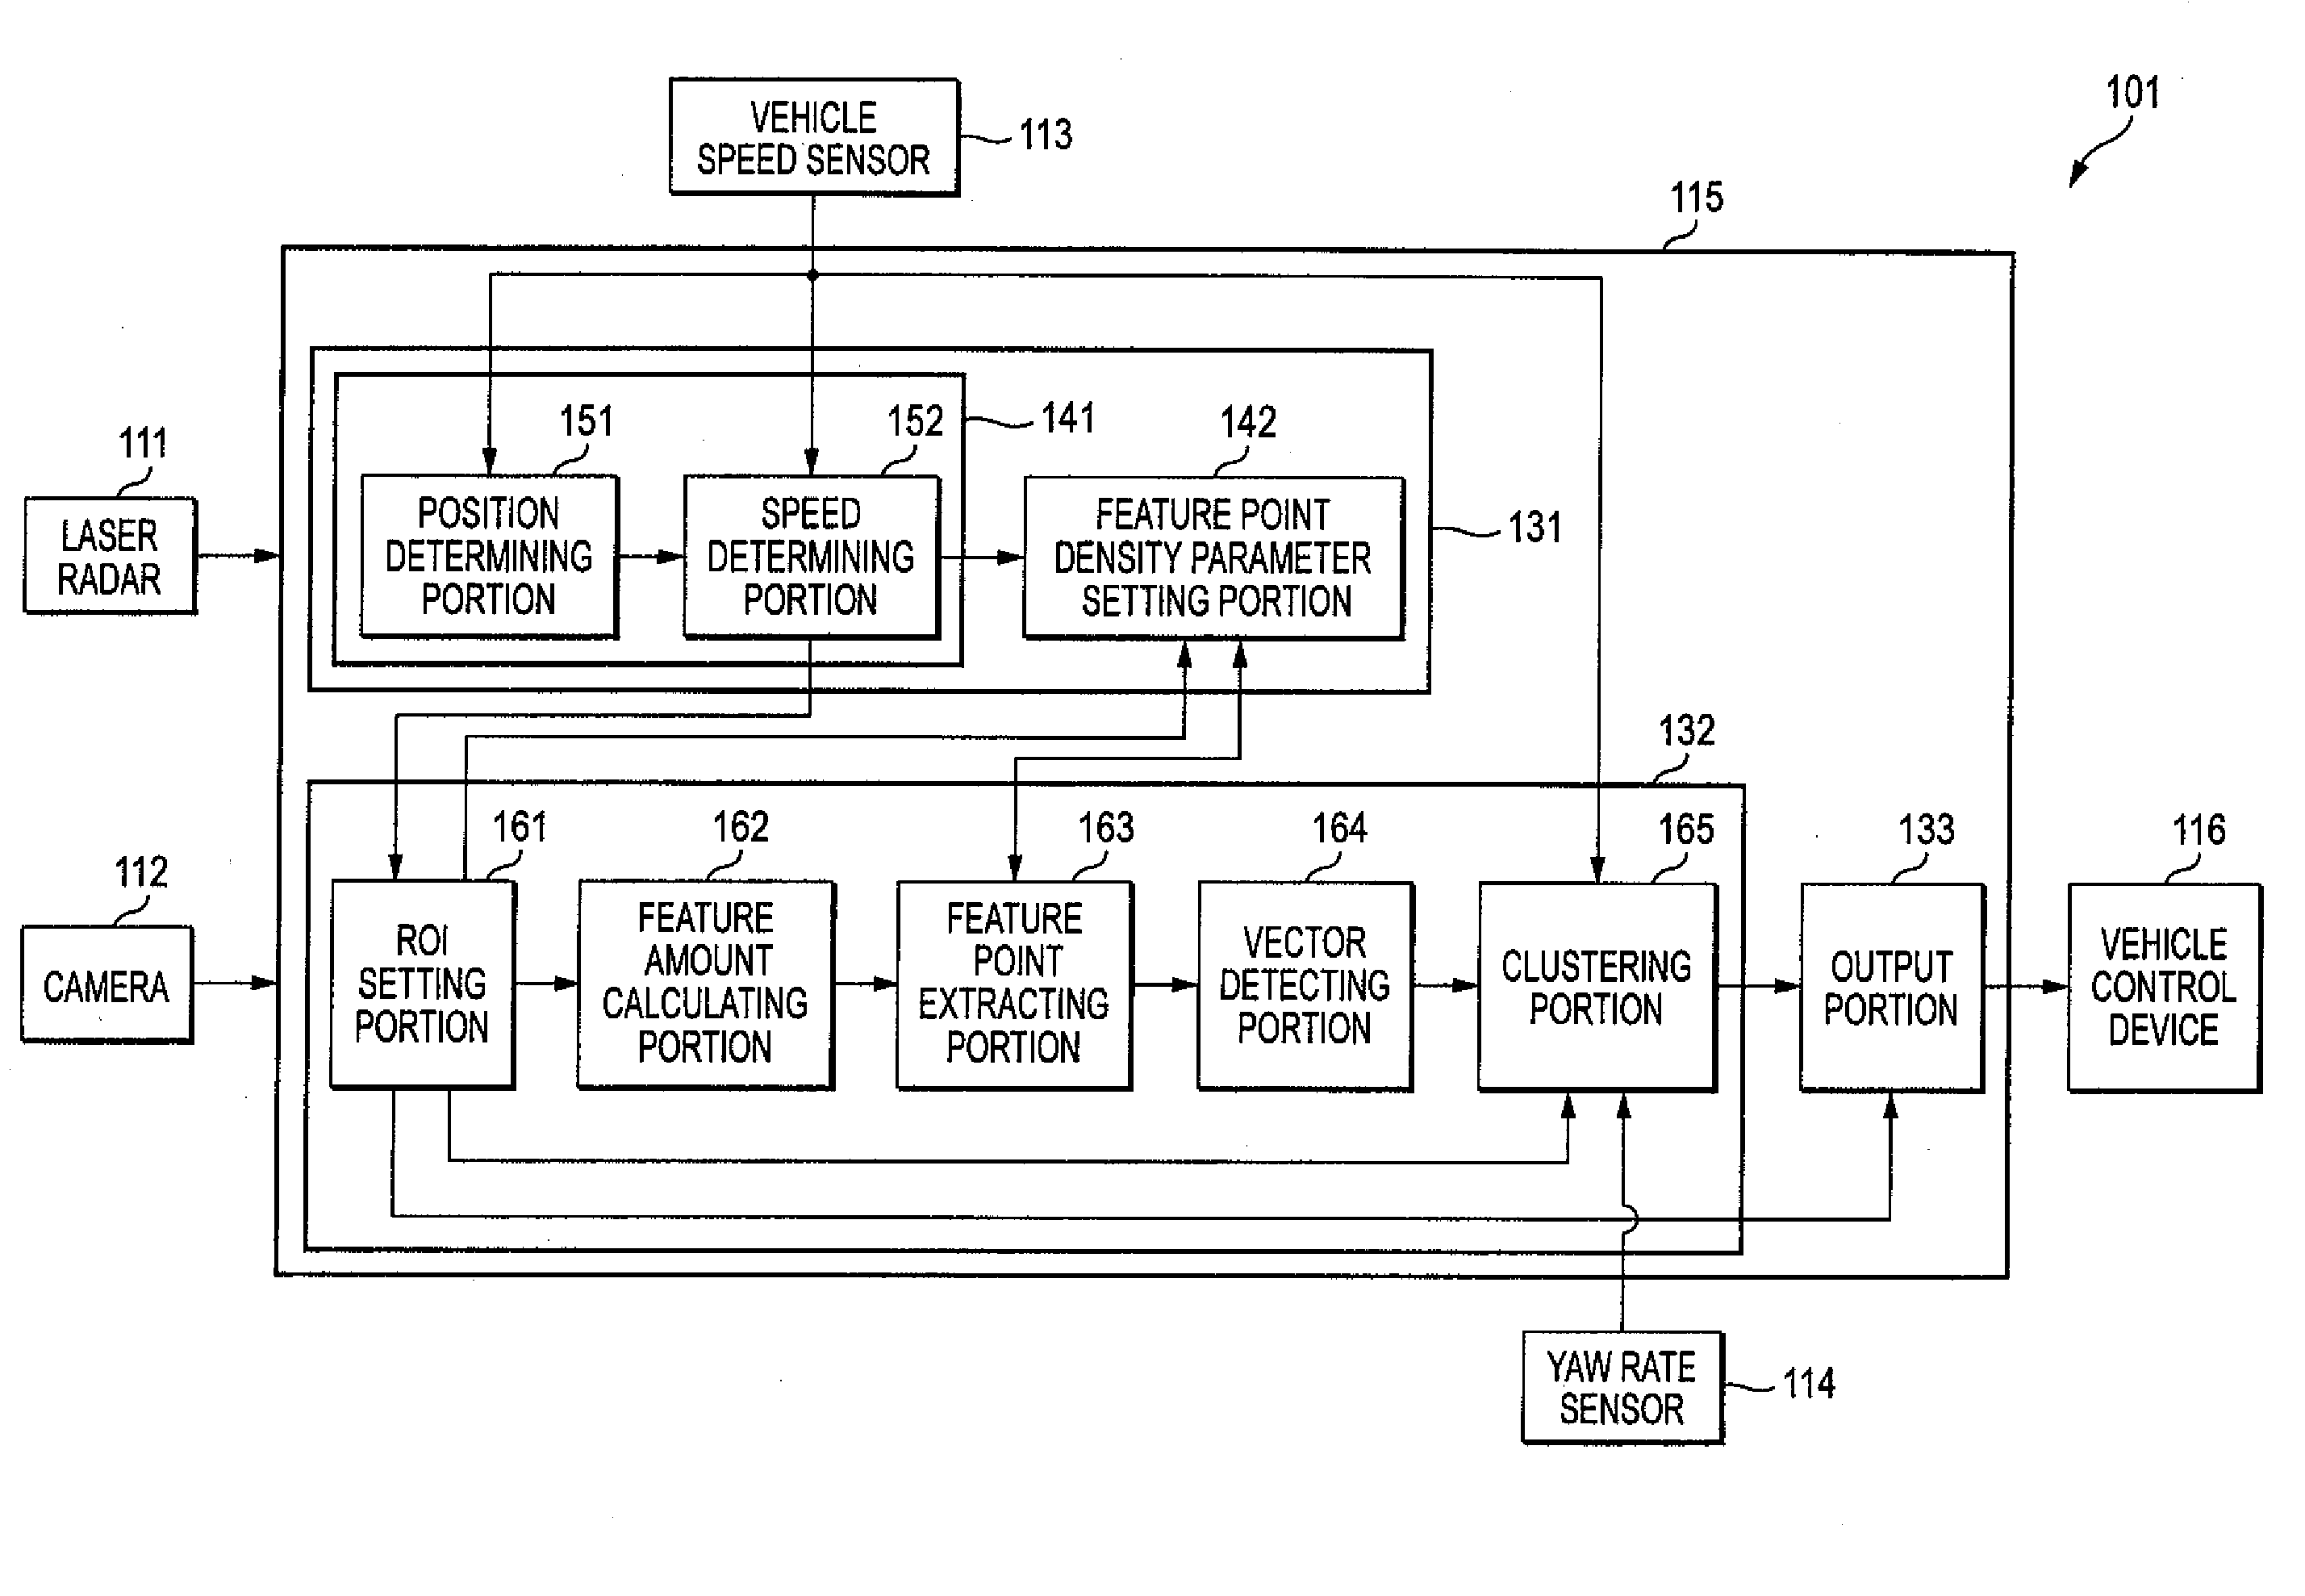 Image processing apparatus, method and program thereof